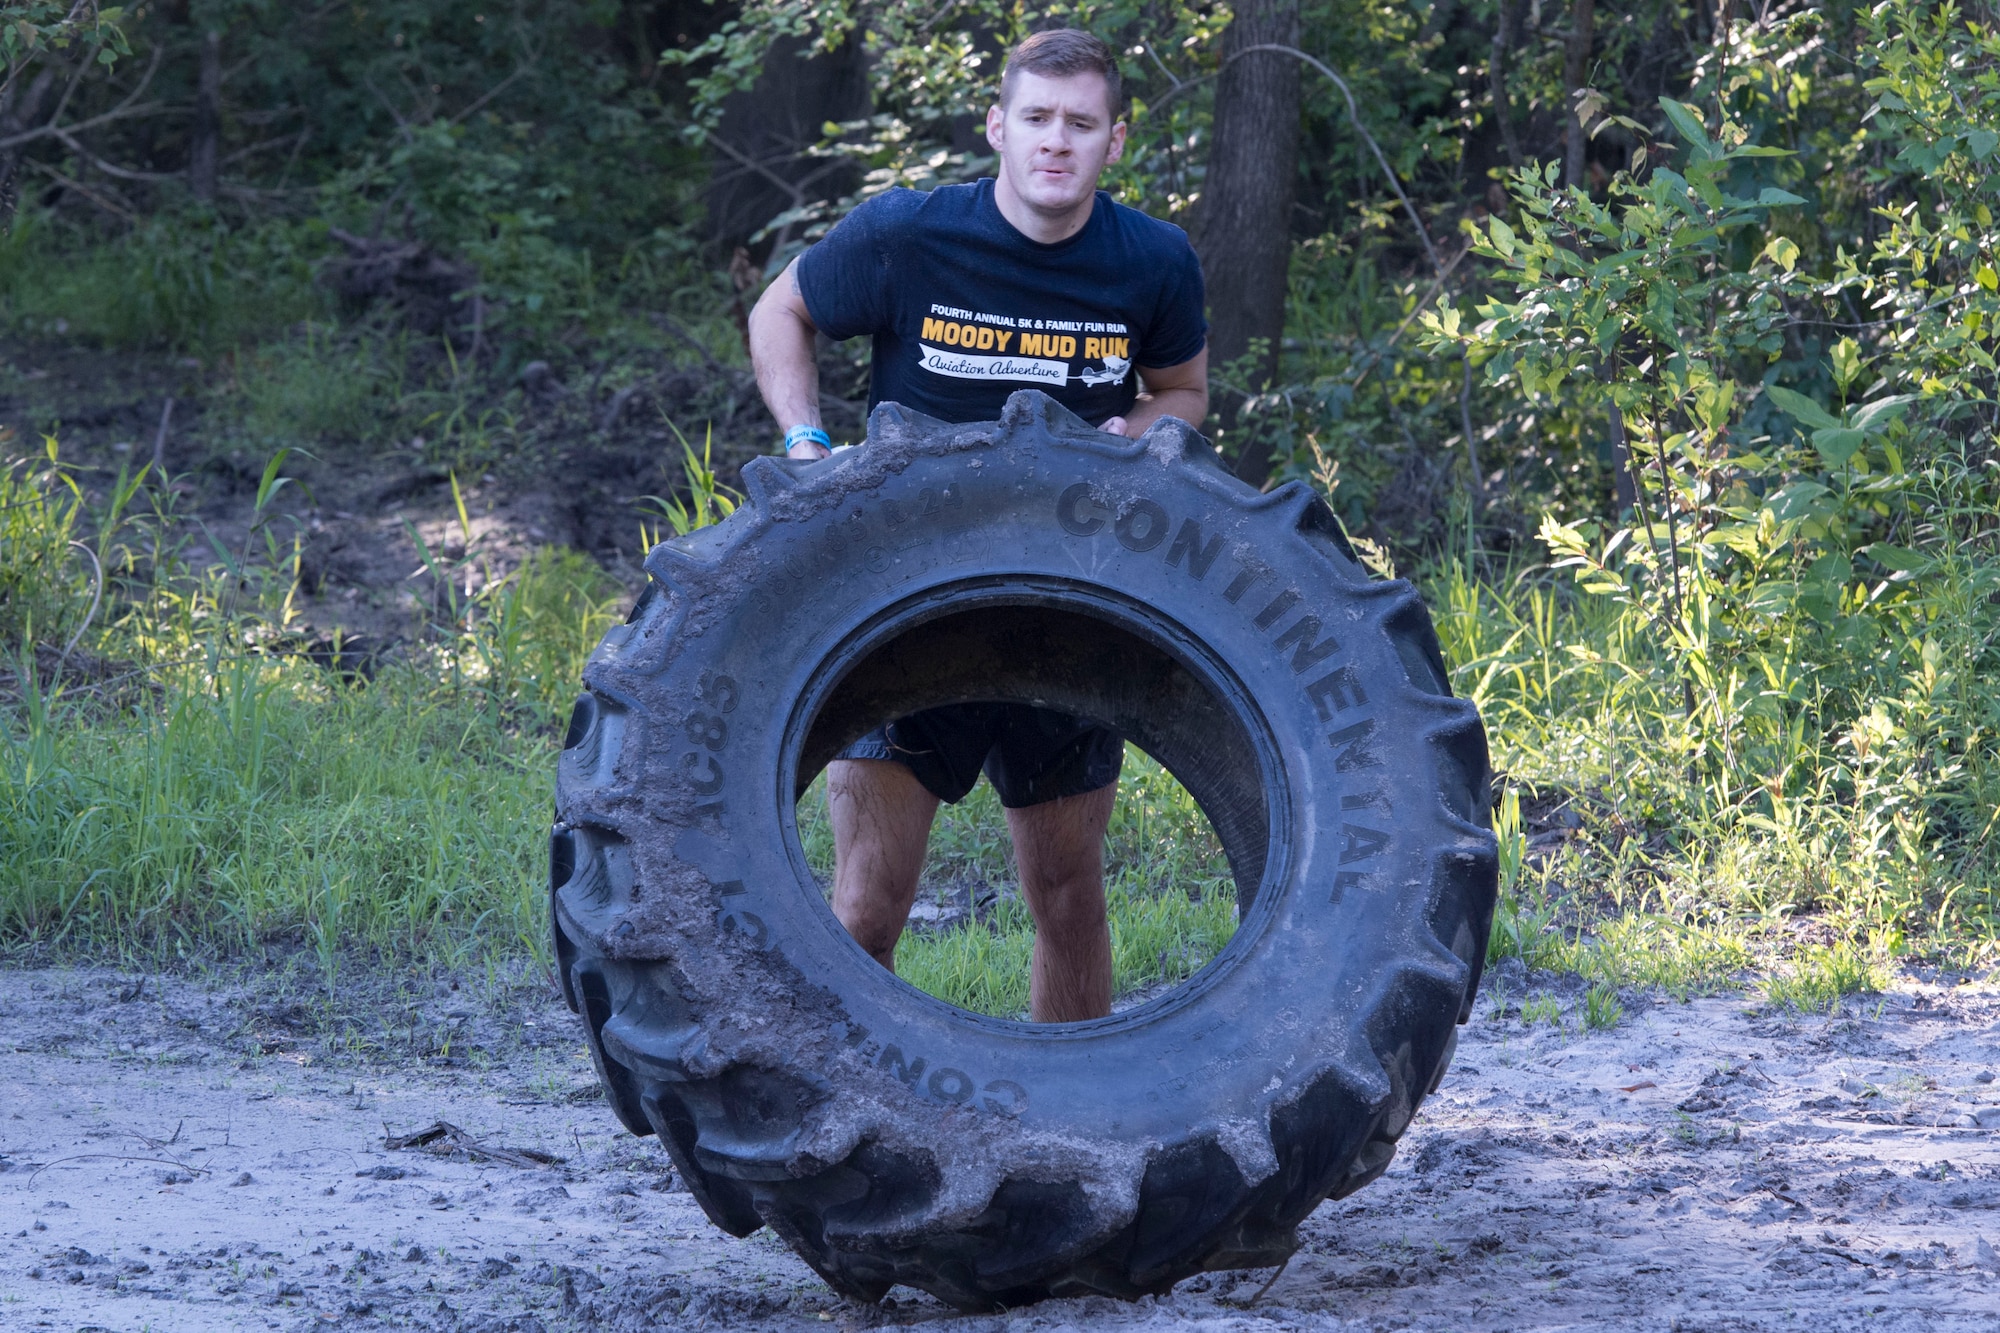 A Moody Mud Run participant flips a tire as part of an obstacle during the 4.2 mile race, May 6, 2017, in Ray City, Ga. The Fourth Annual Moody Mud consisted of both adult and child course that challenged more than 600 participants with obstacles over 4.2 miles. (U.S. Air Force photo by Staff Sgt. Eric Summers Jr.)